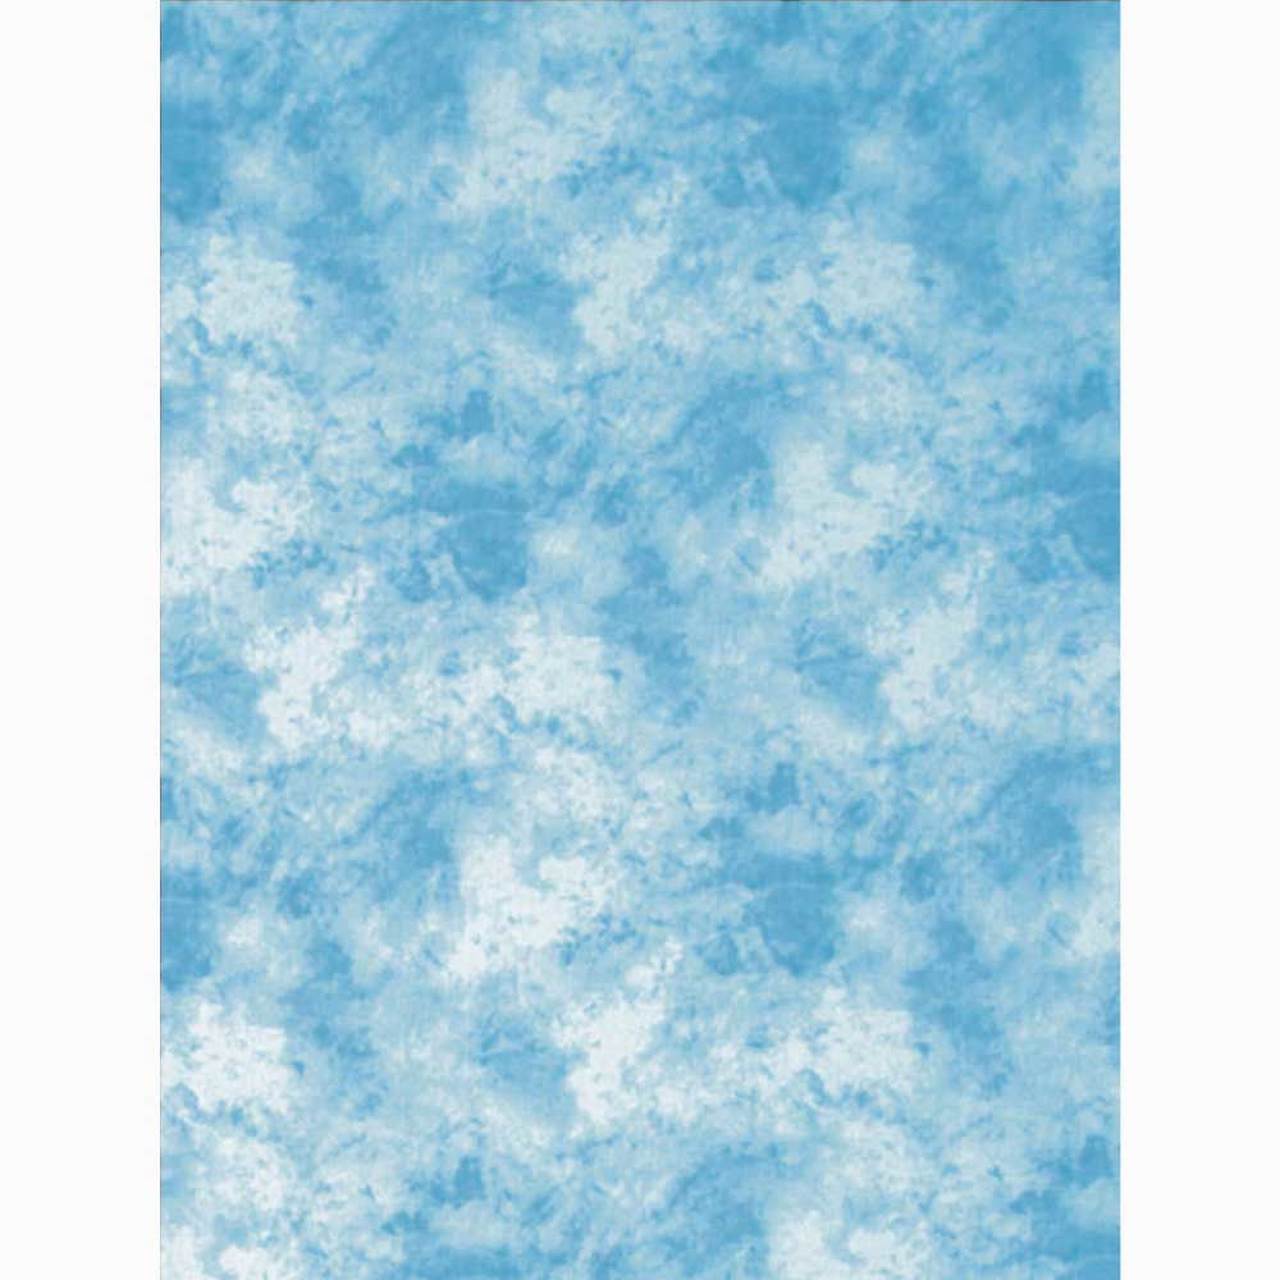 Promaster 9185 10x12' Cloud Dyed Cloth Background (Light Blue)